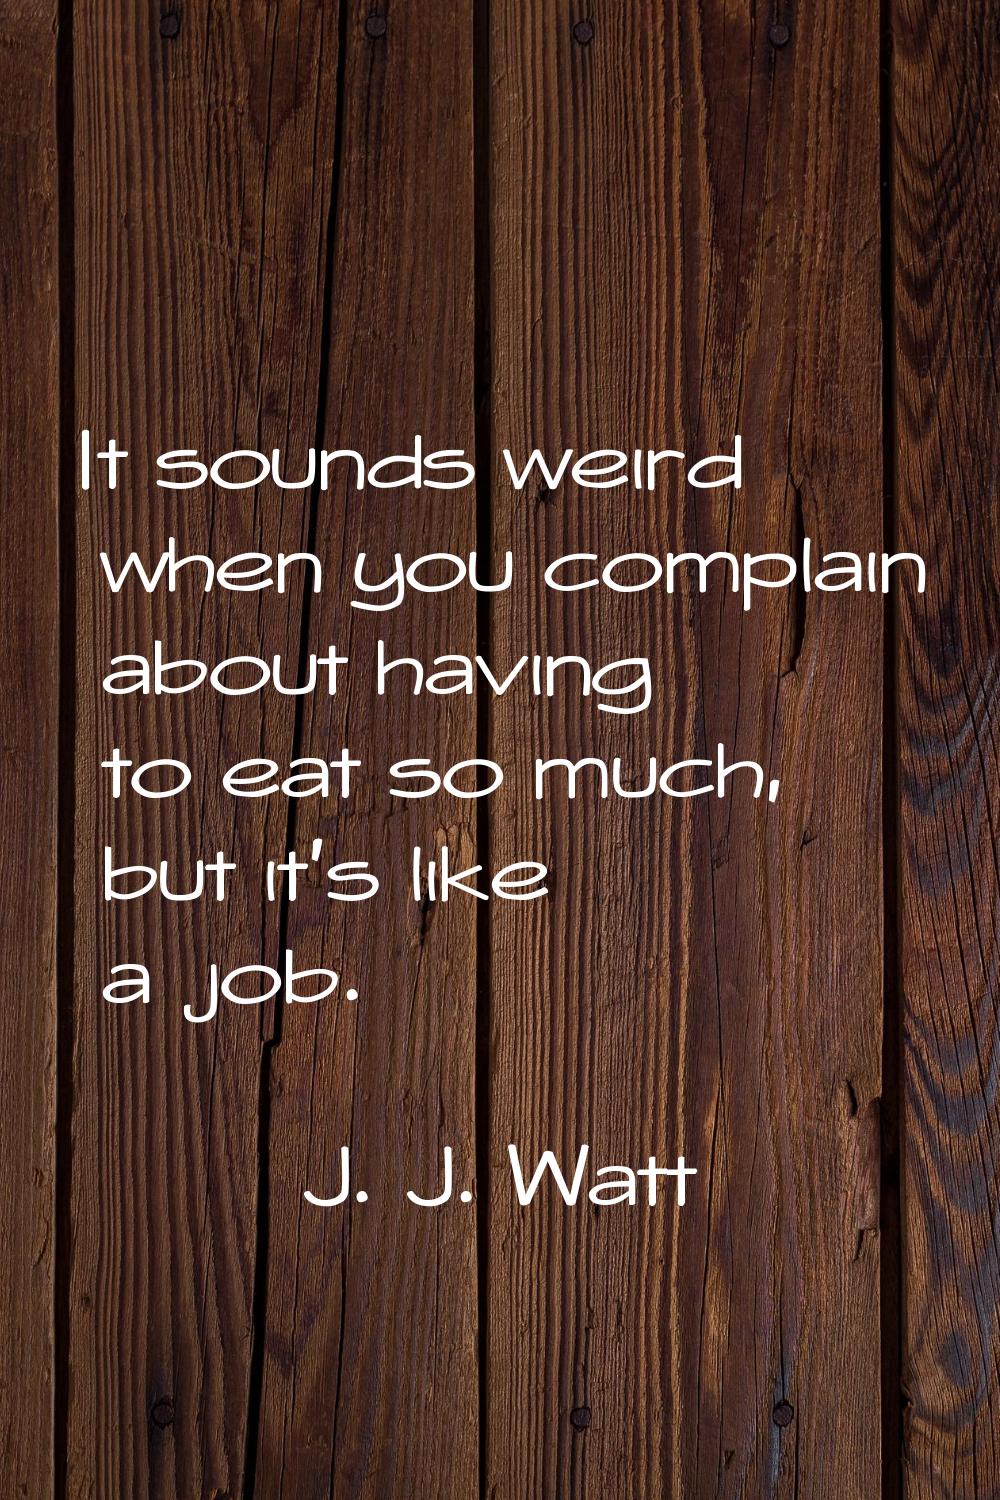 It sounds weird when you complain about having to eat so much, but it's like a job.